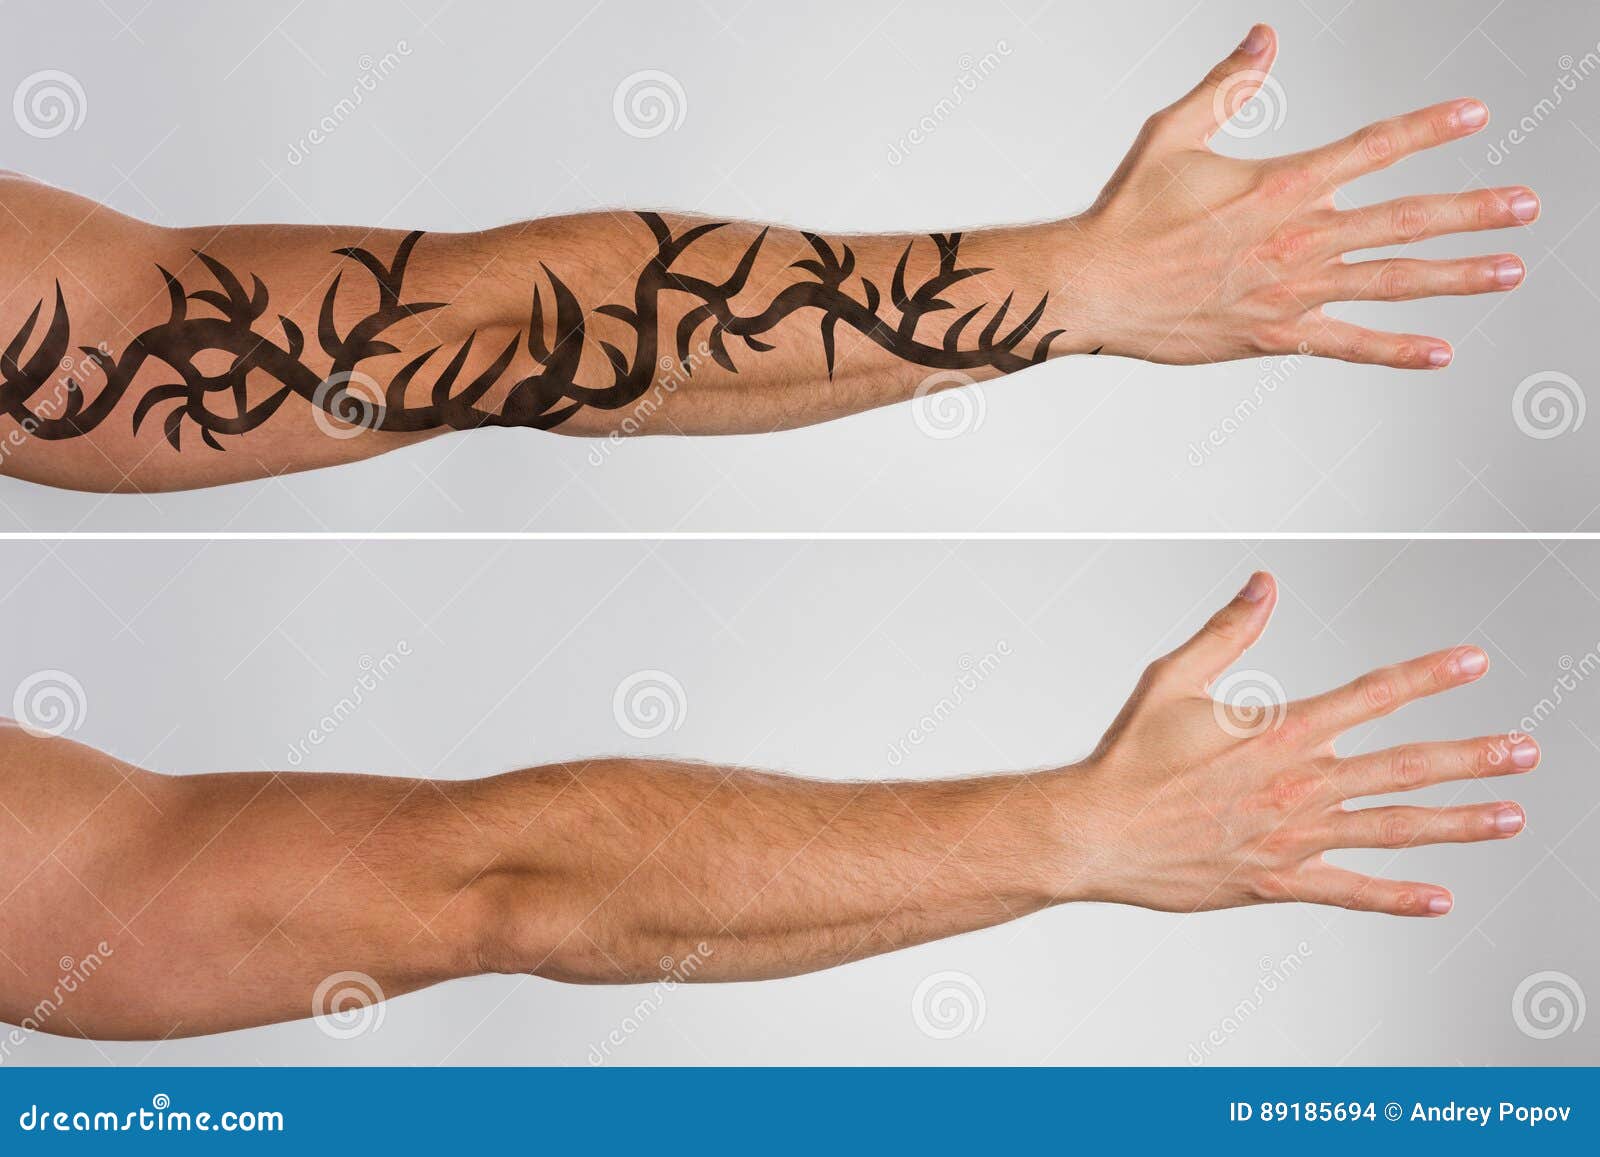 Picosure Laser Tattoo Removal Before and After Best Results